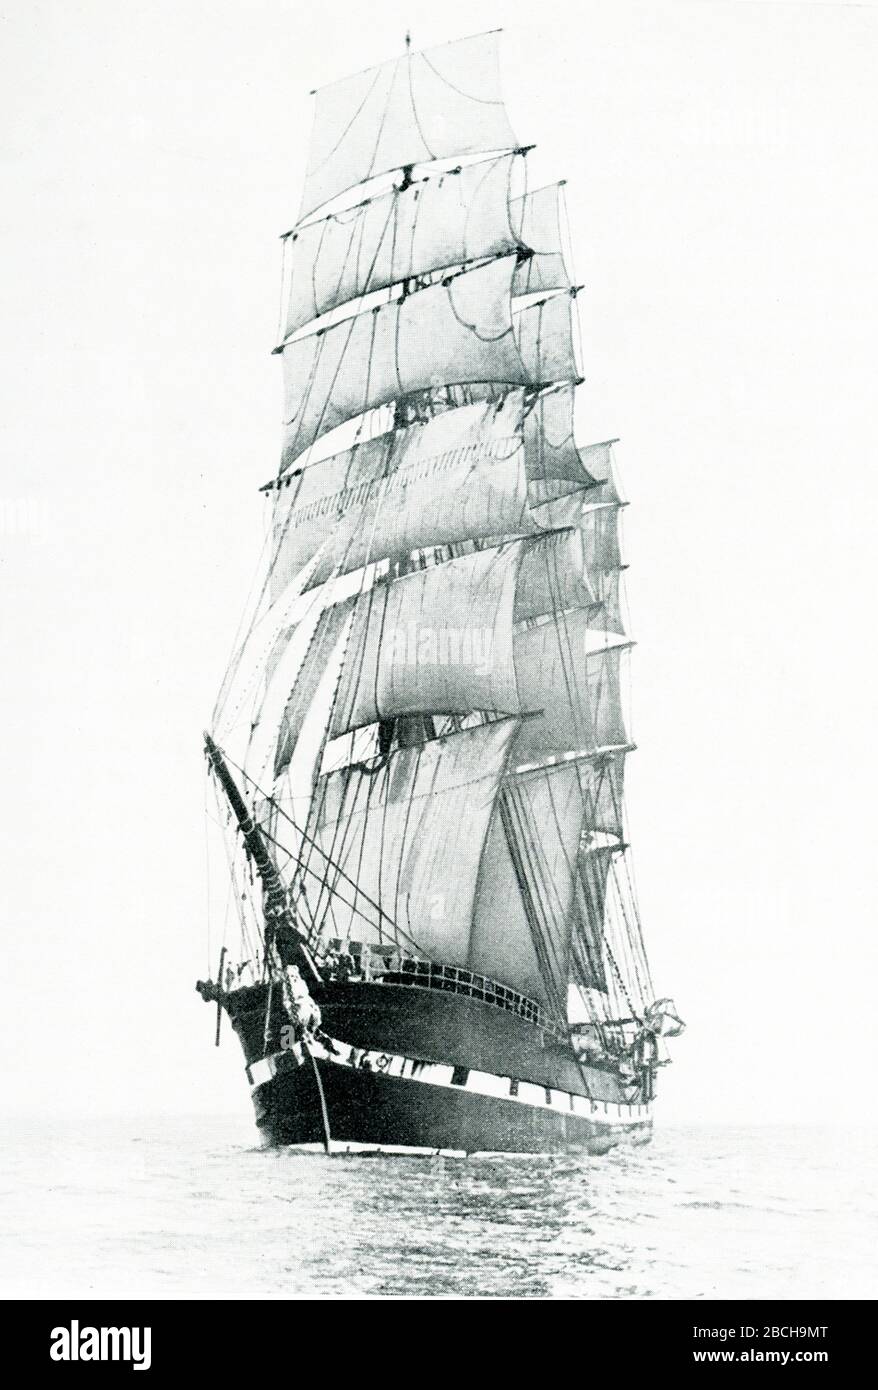 This image shows the Iron Barque Macquarie that was built in 1875.  'Macquarie' was a three-masted ship-rigged vessel, built as the 'Melbourne' by R. & H. Green of Blackwall for their Blackwall line run to Australia. She was sold to Devitt & Moore in 1888 and they changed her destination port from Melbourne to Sydney and her name to 'Macquarie'. She was one of Devitt & Moore's best known ships and mainly carried passengers on the outward run. On the return journey, the second- and third-class cabins were dismantled to accommodate a cargo of wool. Stock Photo